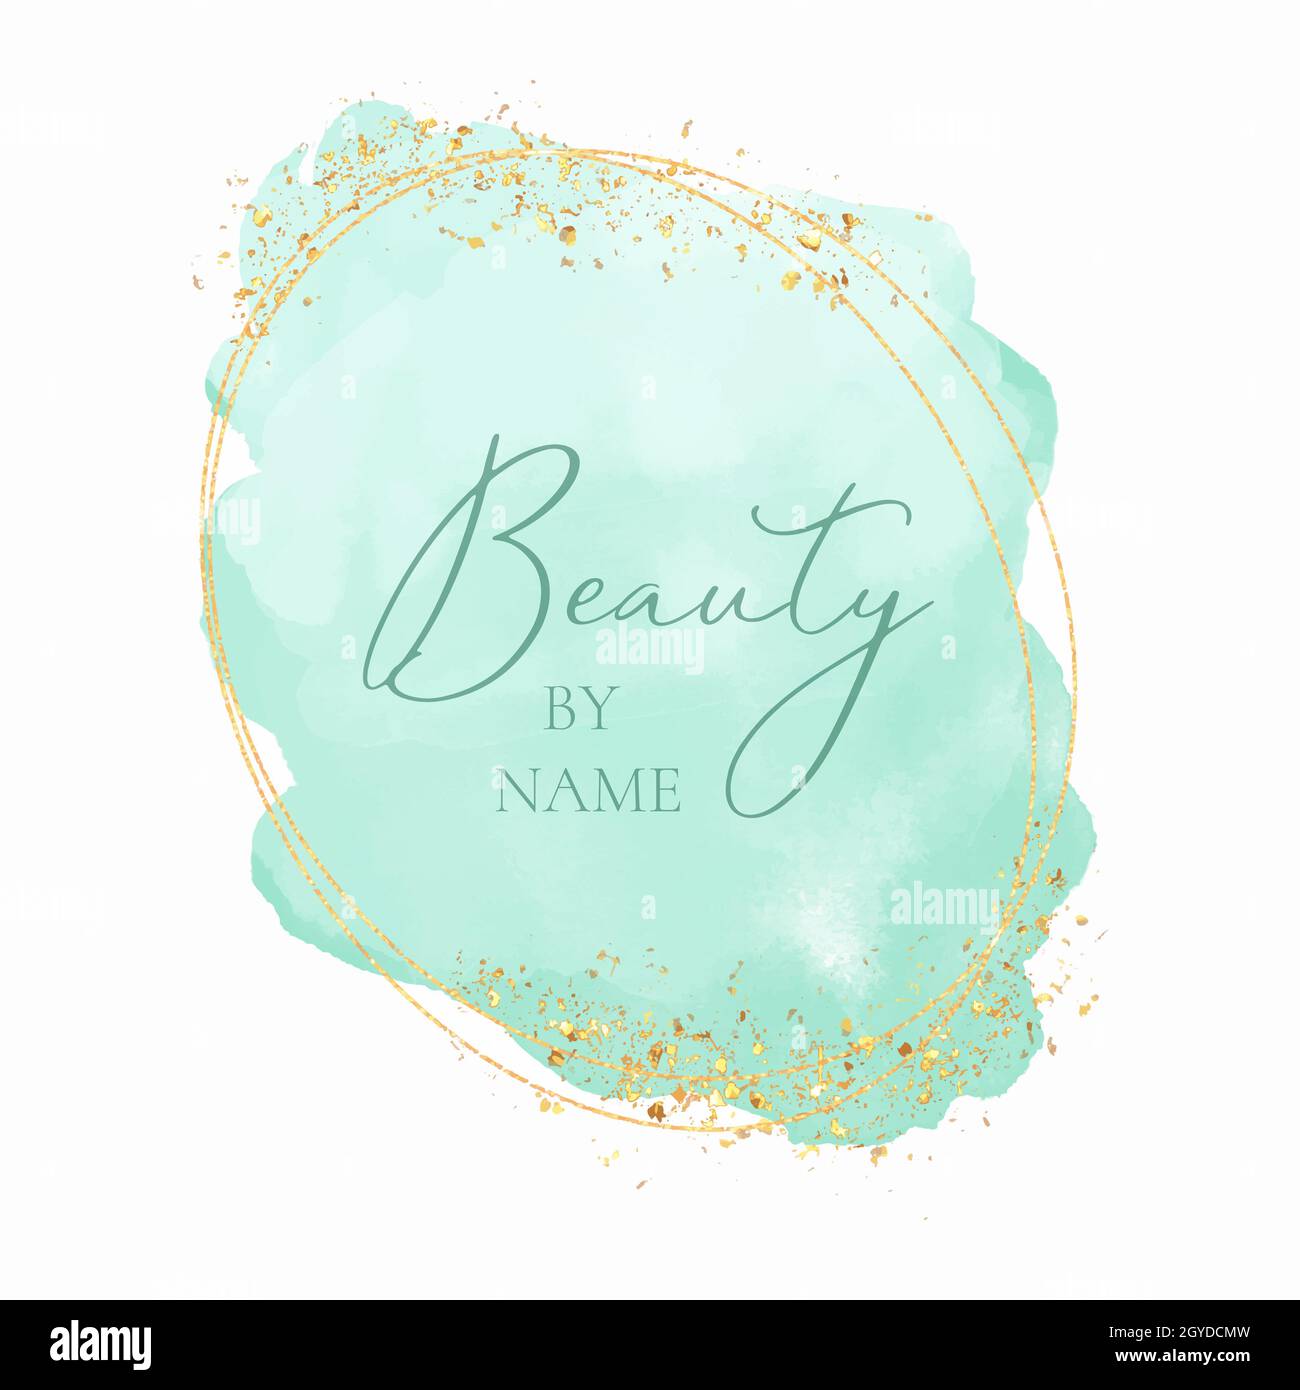 Decorative beauty themed watercolour logo design with glittery gold elements Stock Photo